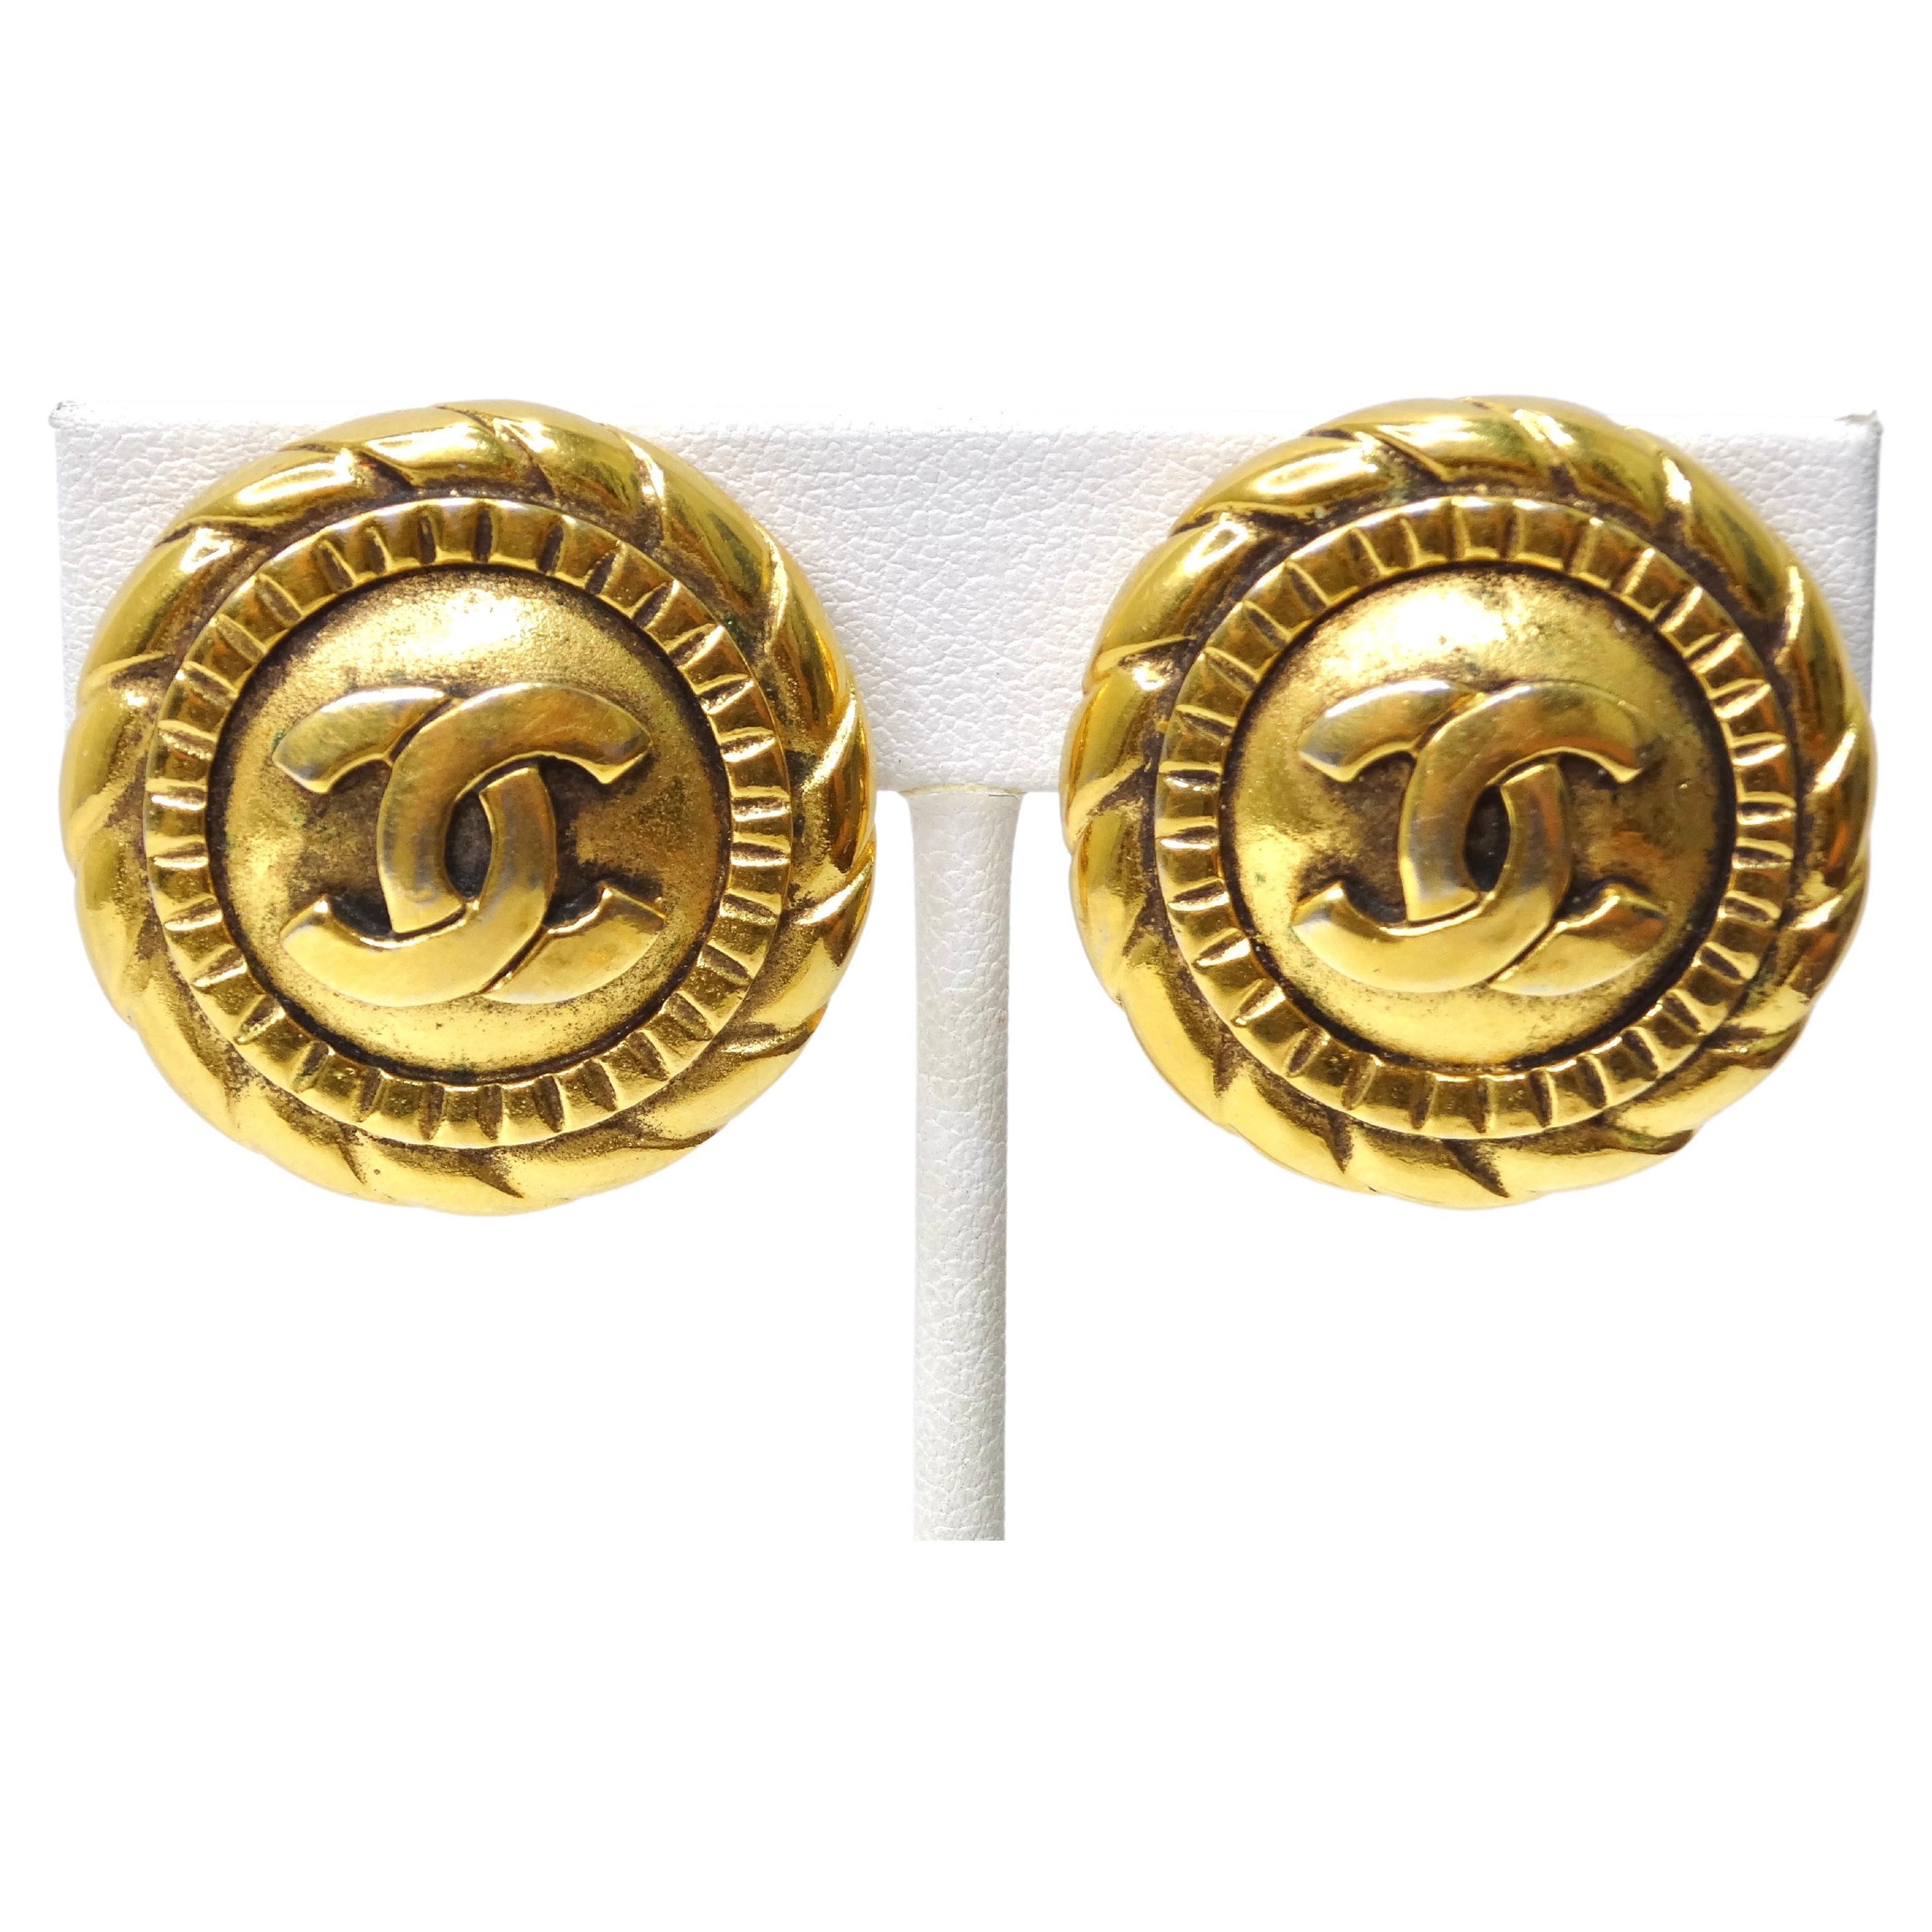 Feel sophisticated and stylish in these classic Chanel clip-on earrings. What sets Chanel jewelry apart from other brands, either the costume or fine jewelry, is the effortlessly bold and elegant design aesthetic. A perfect investment piece to say